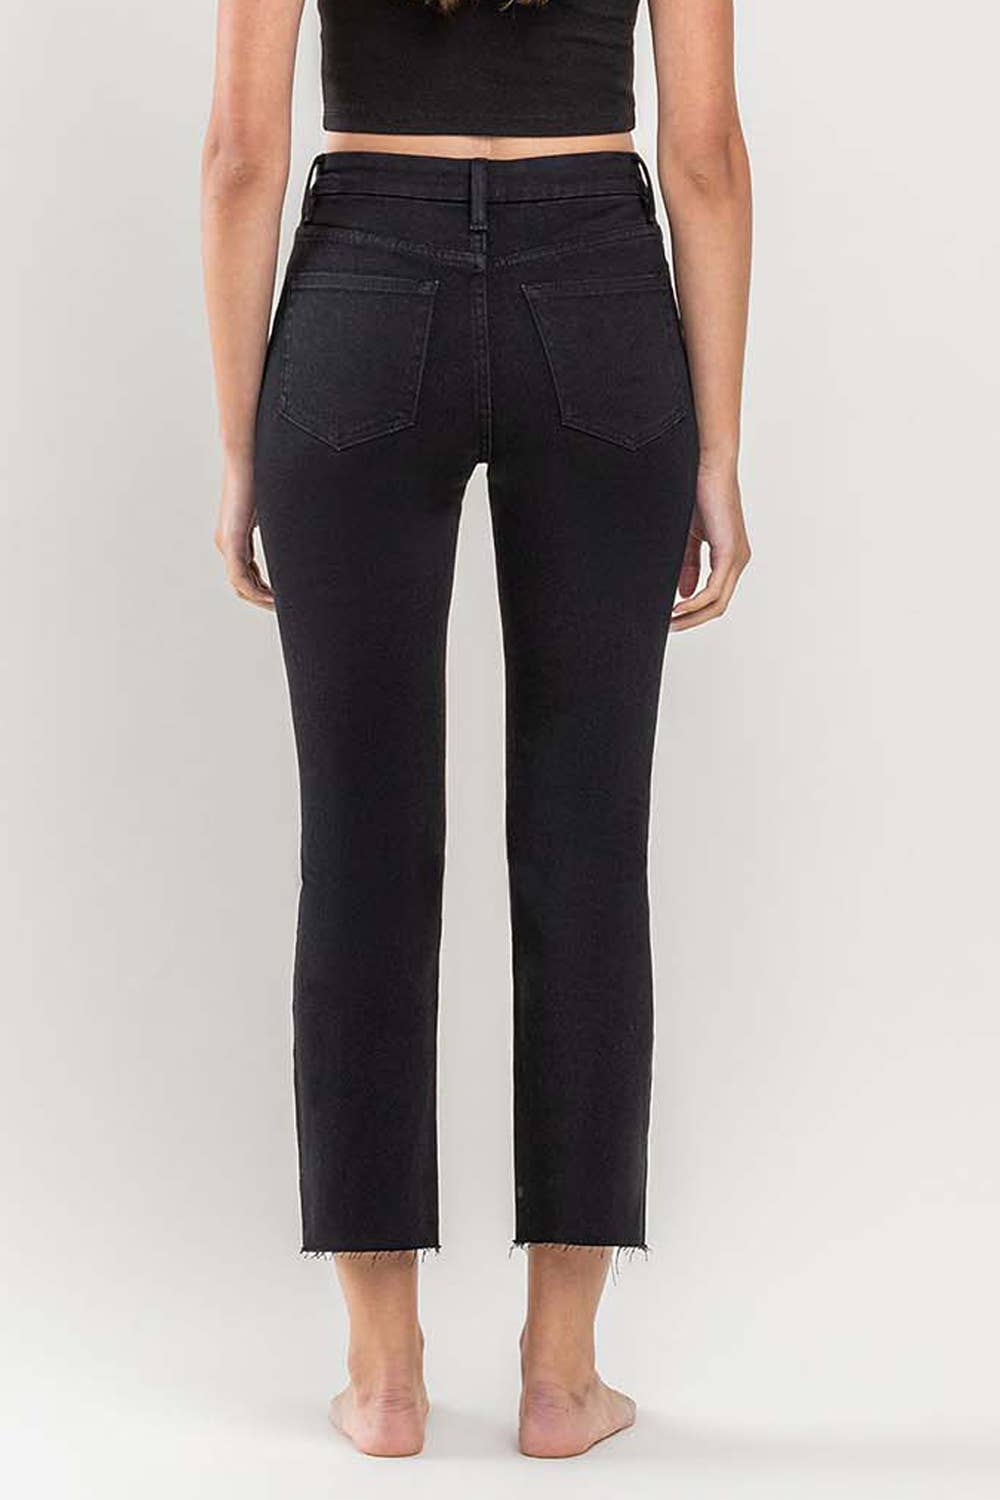 Lucy High Rise Cropped Black Straight Jeans - Vervet